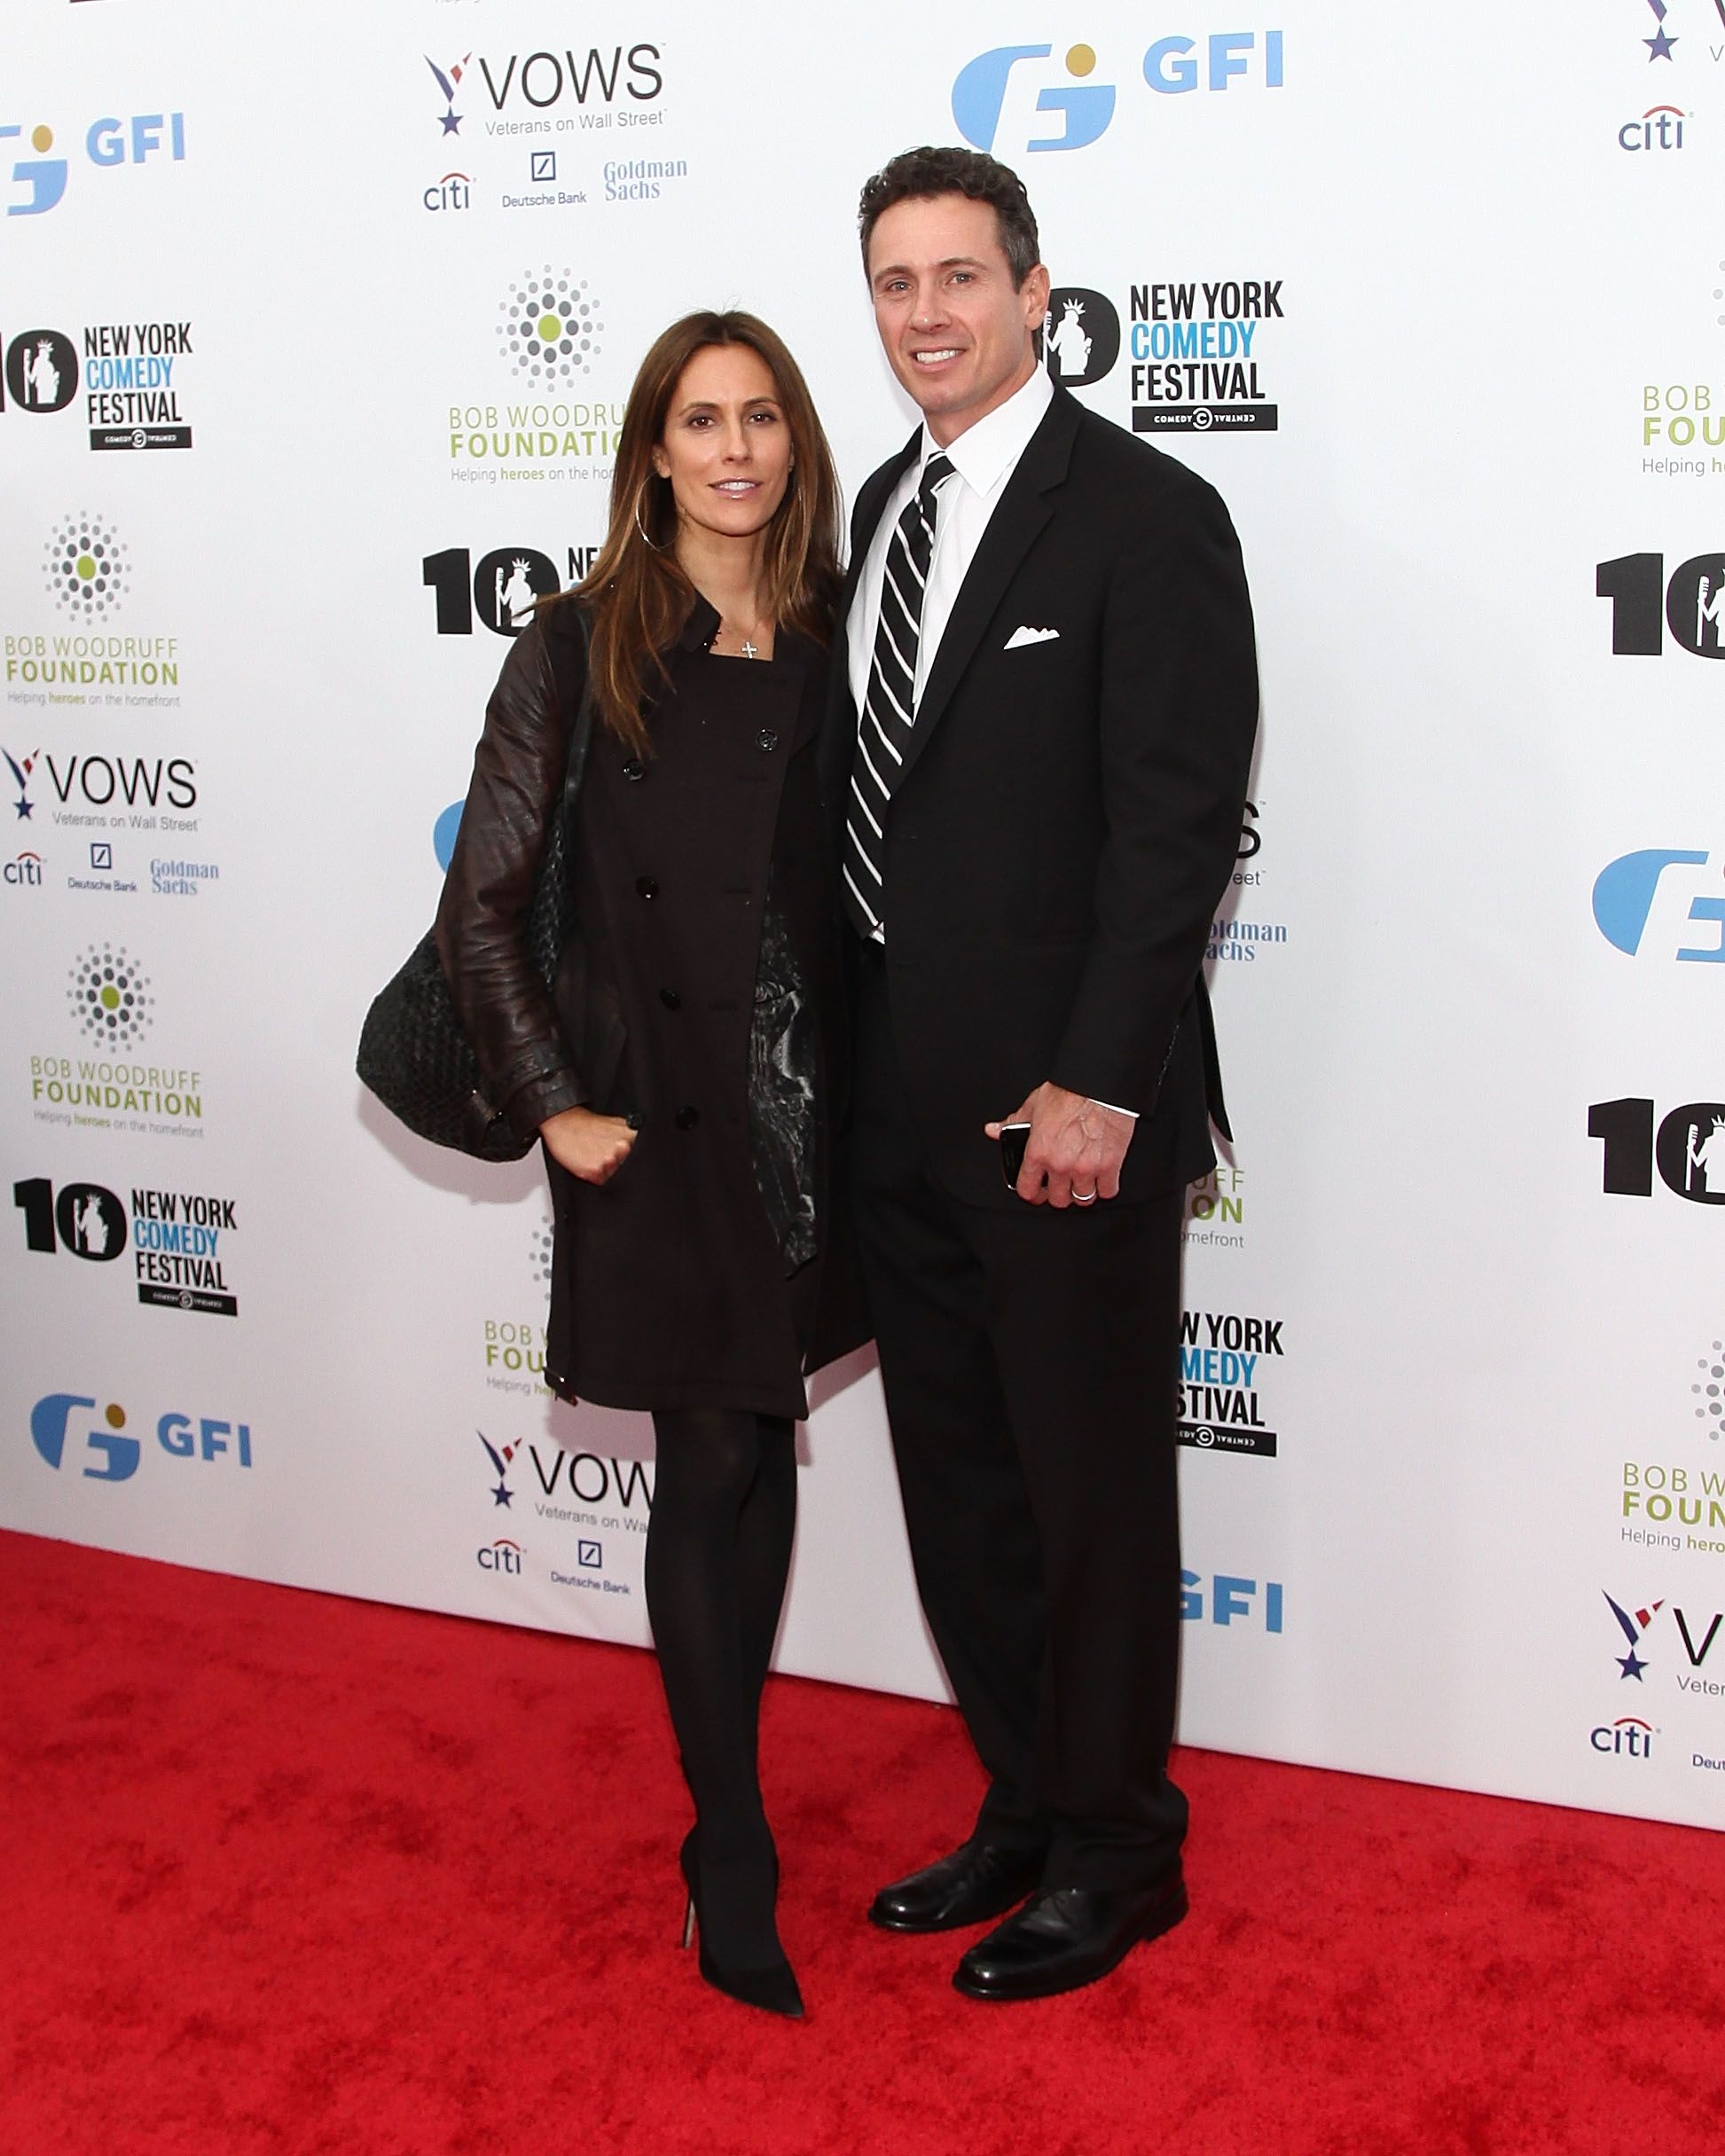 Cristina and Chris Cuomo at the 7th annual "Stand Up for Heroes" benefit on November 6, 2013, in New York City | Photo: Taylor Hill/FilmMagic/Getty Images